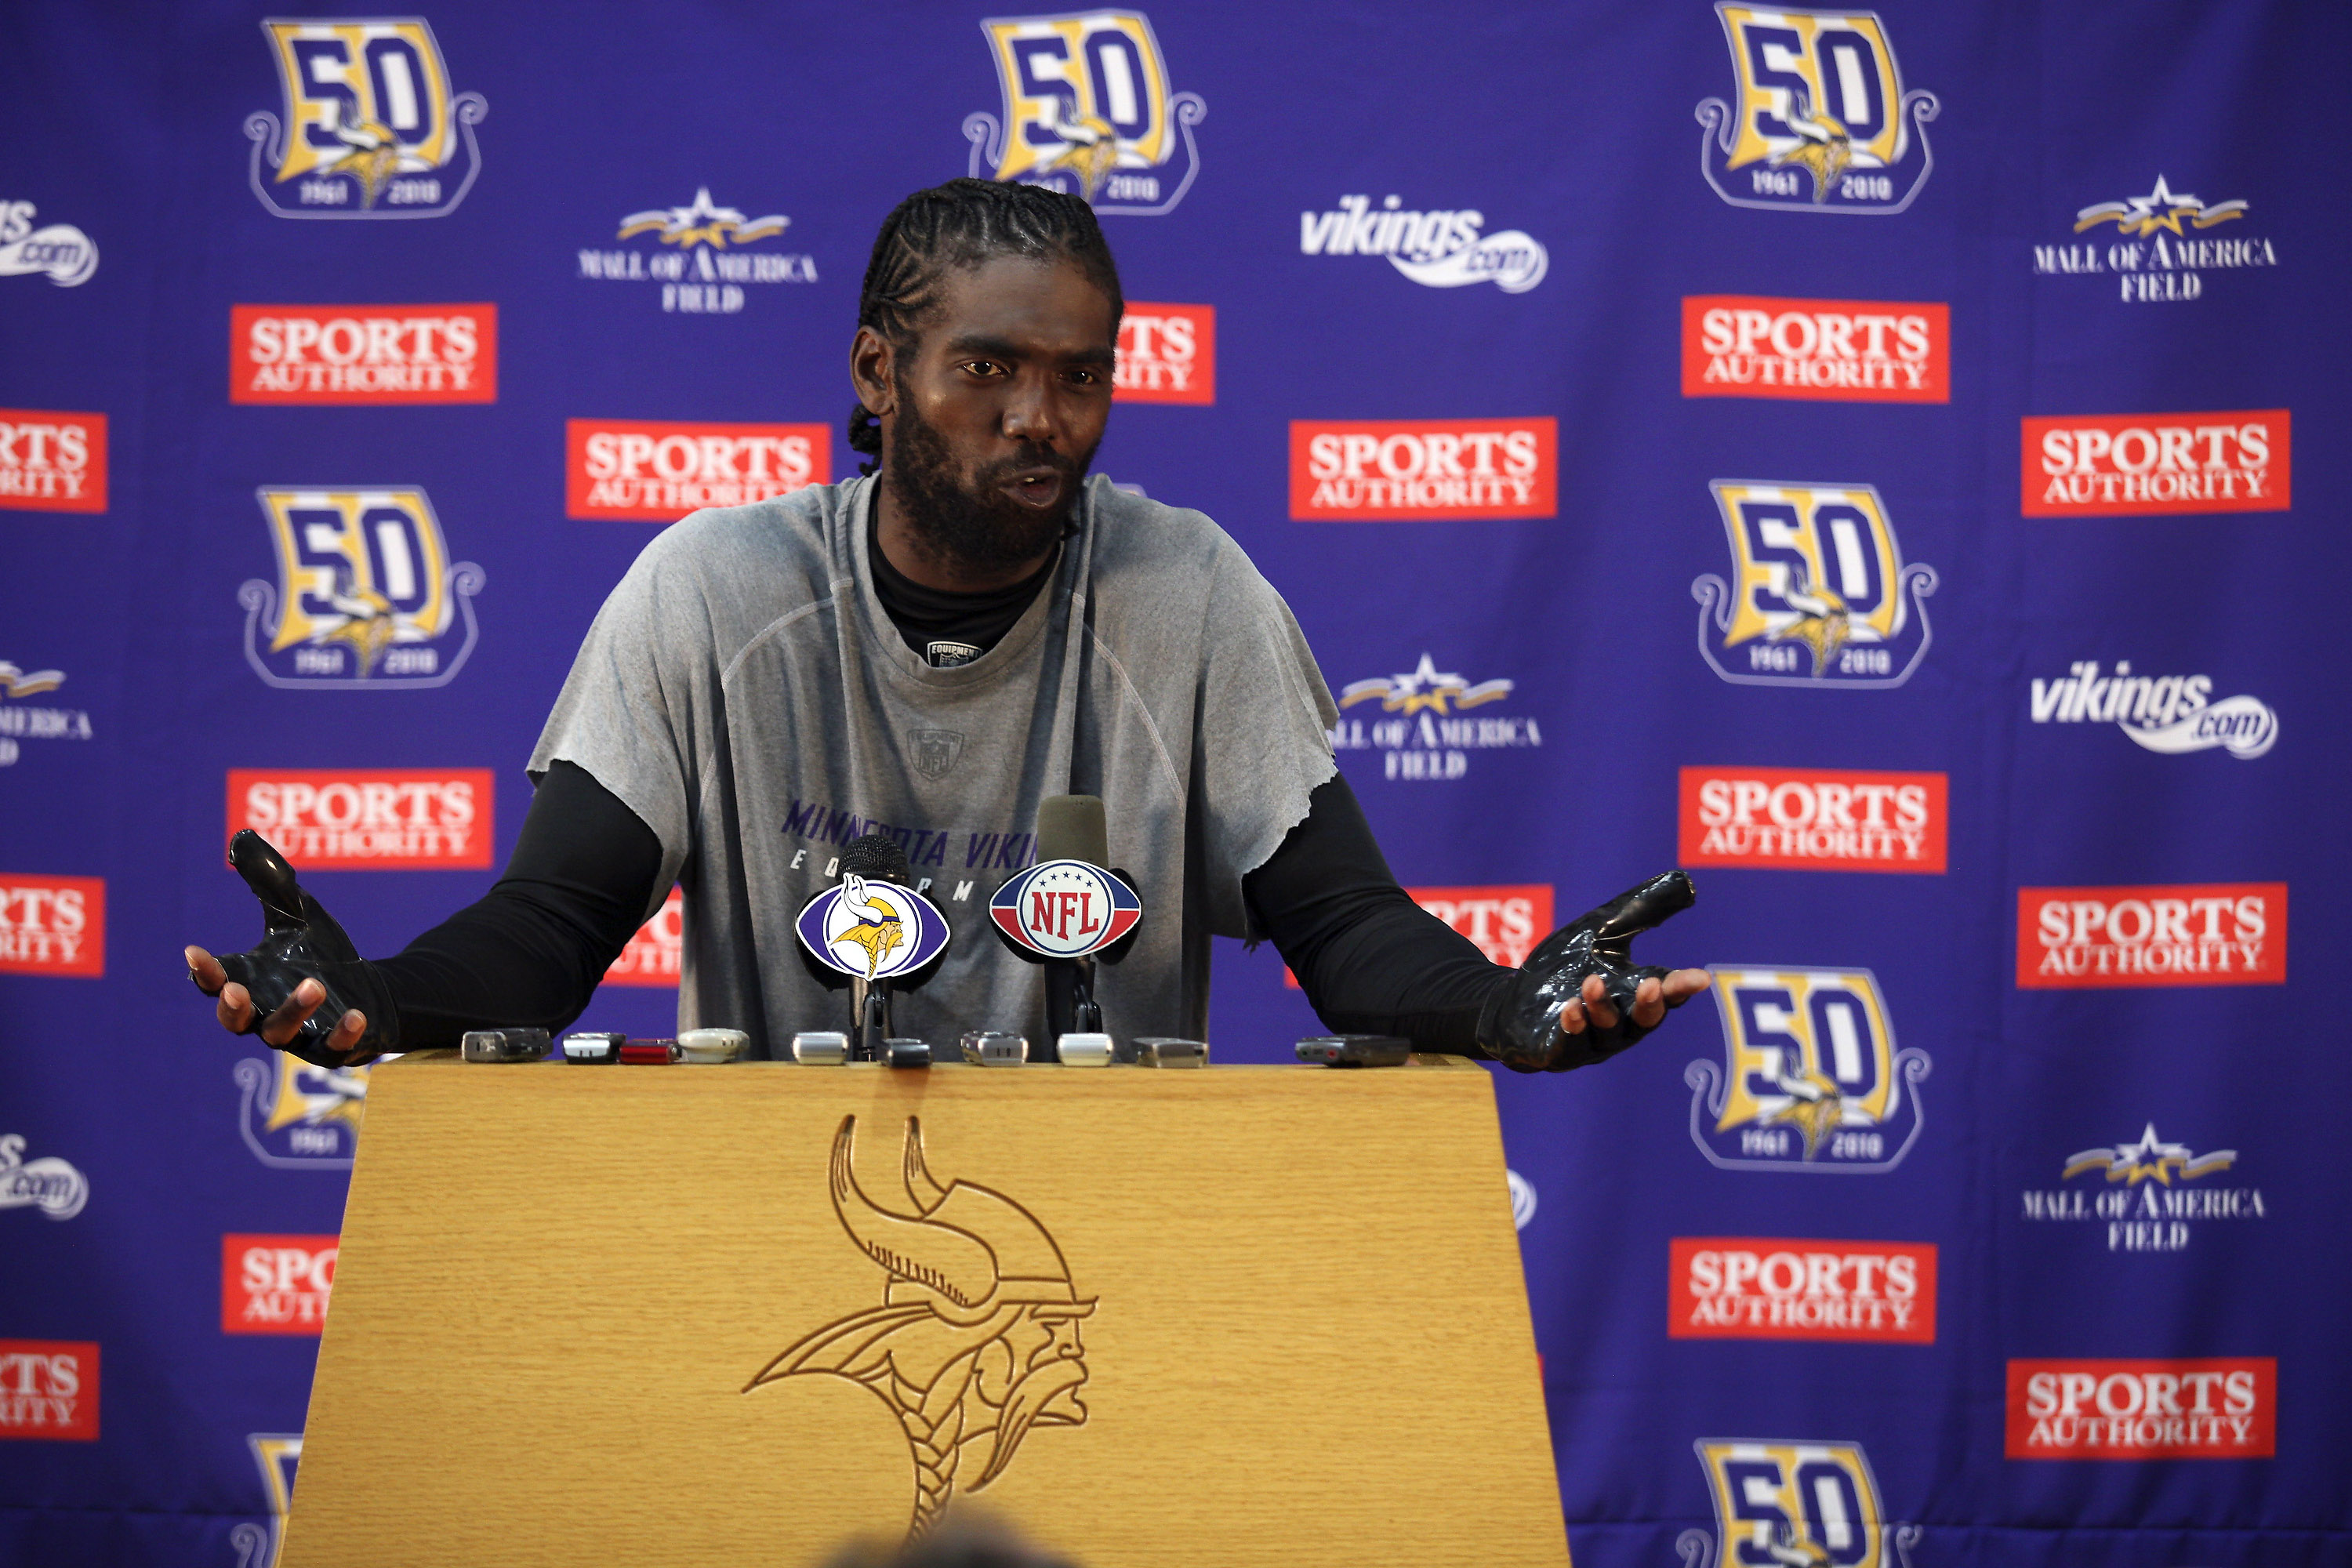 EDEN PRAIRIE, MN - OCTOBER 7:  Minnesota Vikings wide receiver Randy Moss answers questions from the media during a press conference at Winter Park on October 7, 2010 in Eden Prairie, Minnesota.  (Photo by Adam Bettcher/Getty Images)